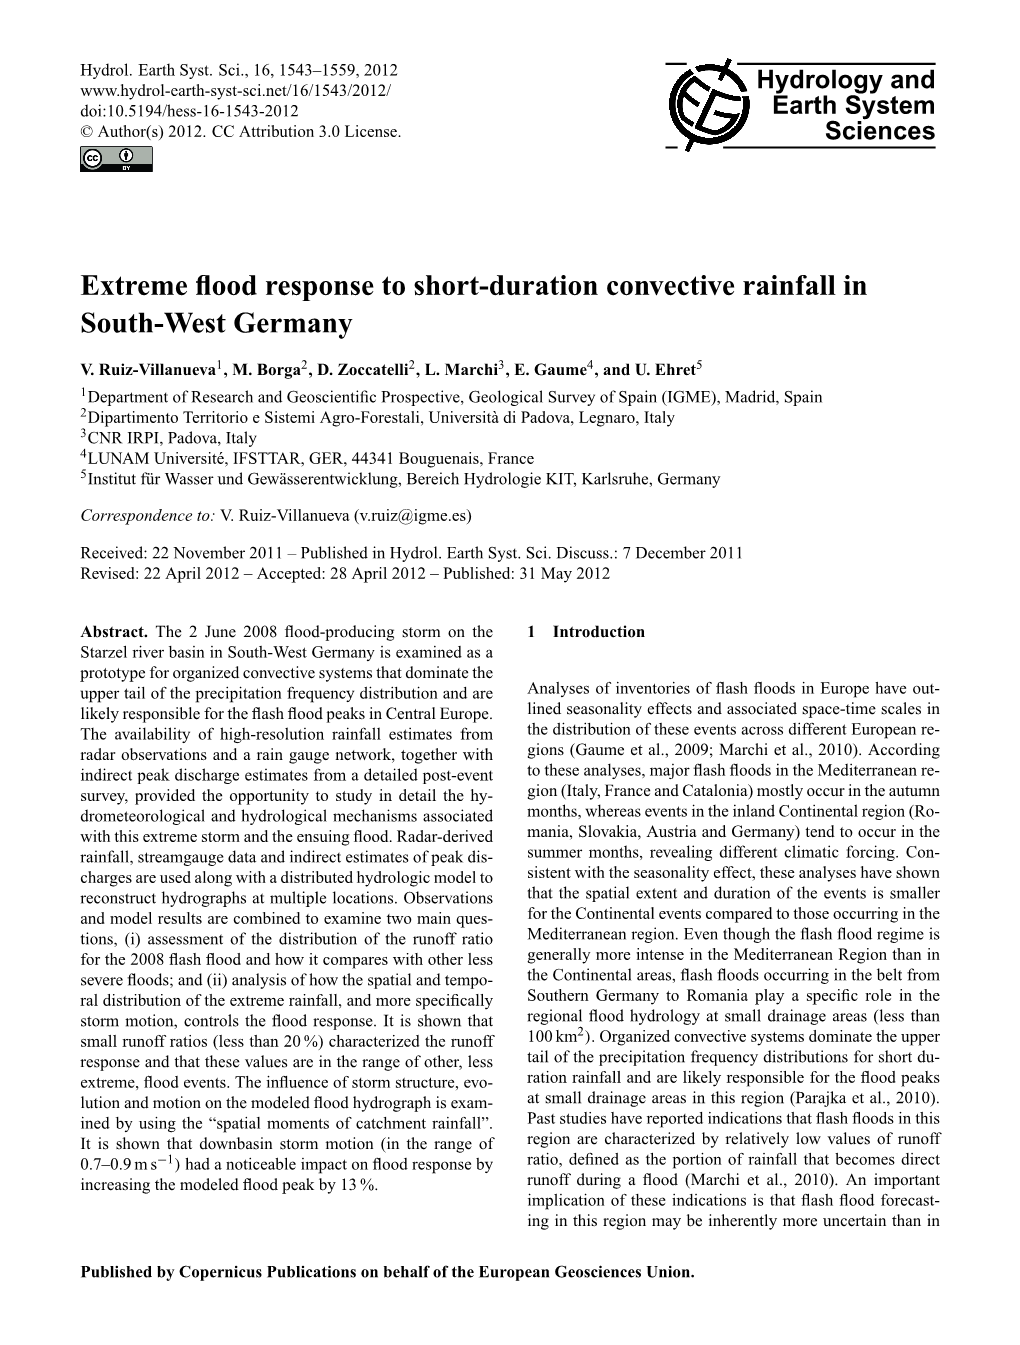 Extreme Flood Response to Short-Duration Convective Rainfall In